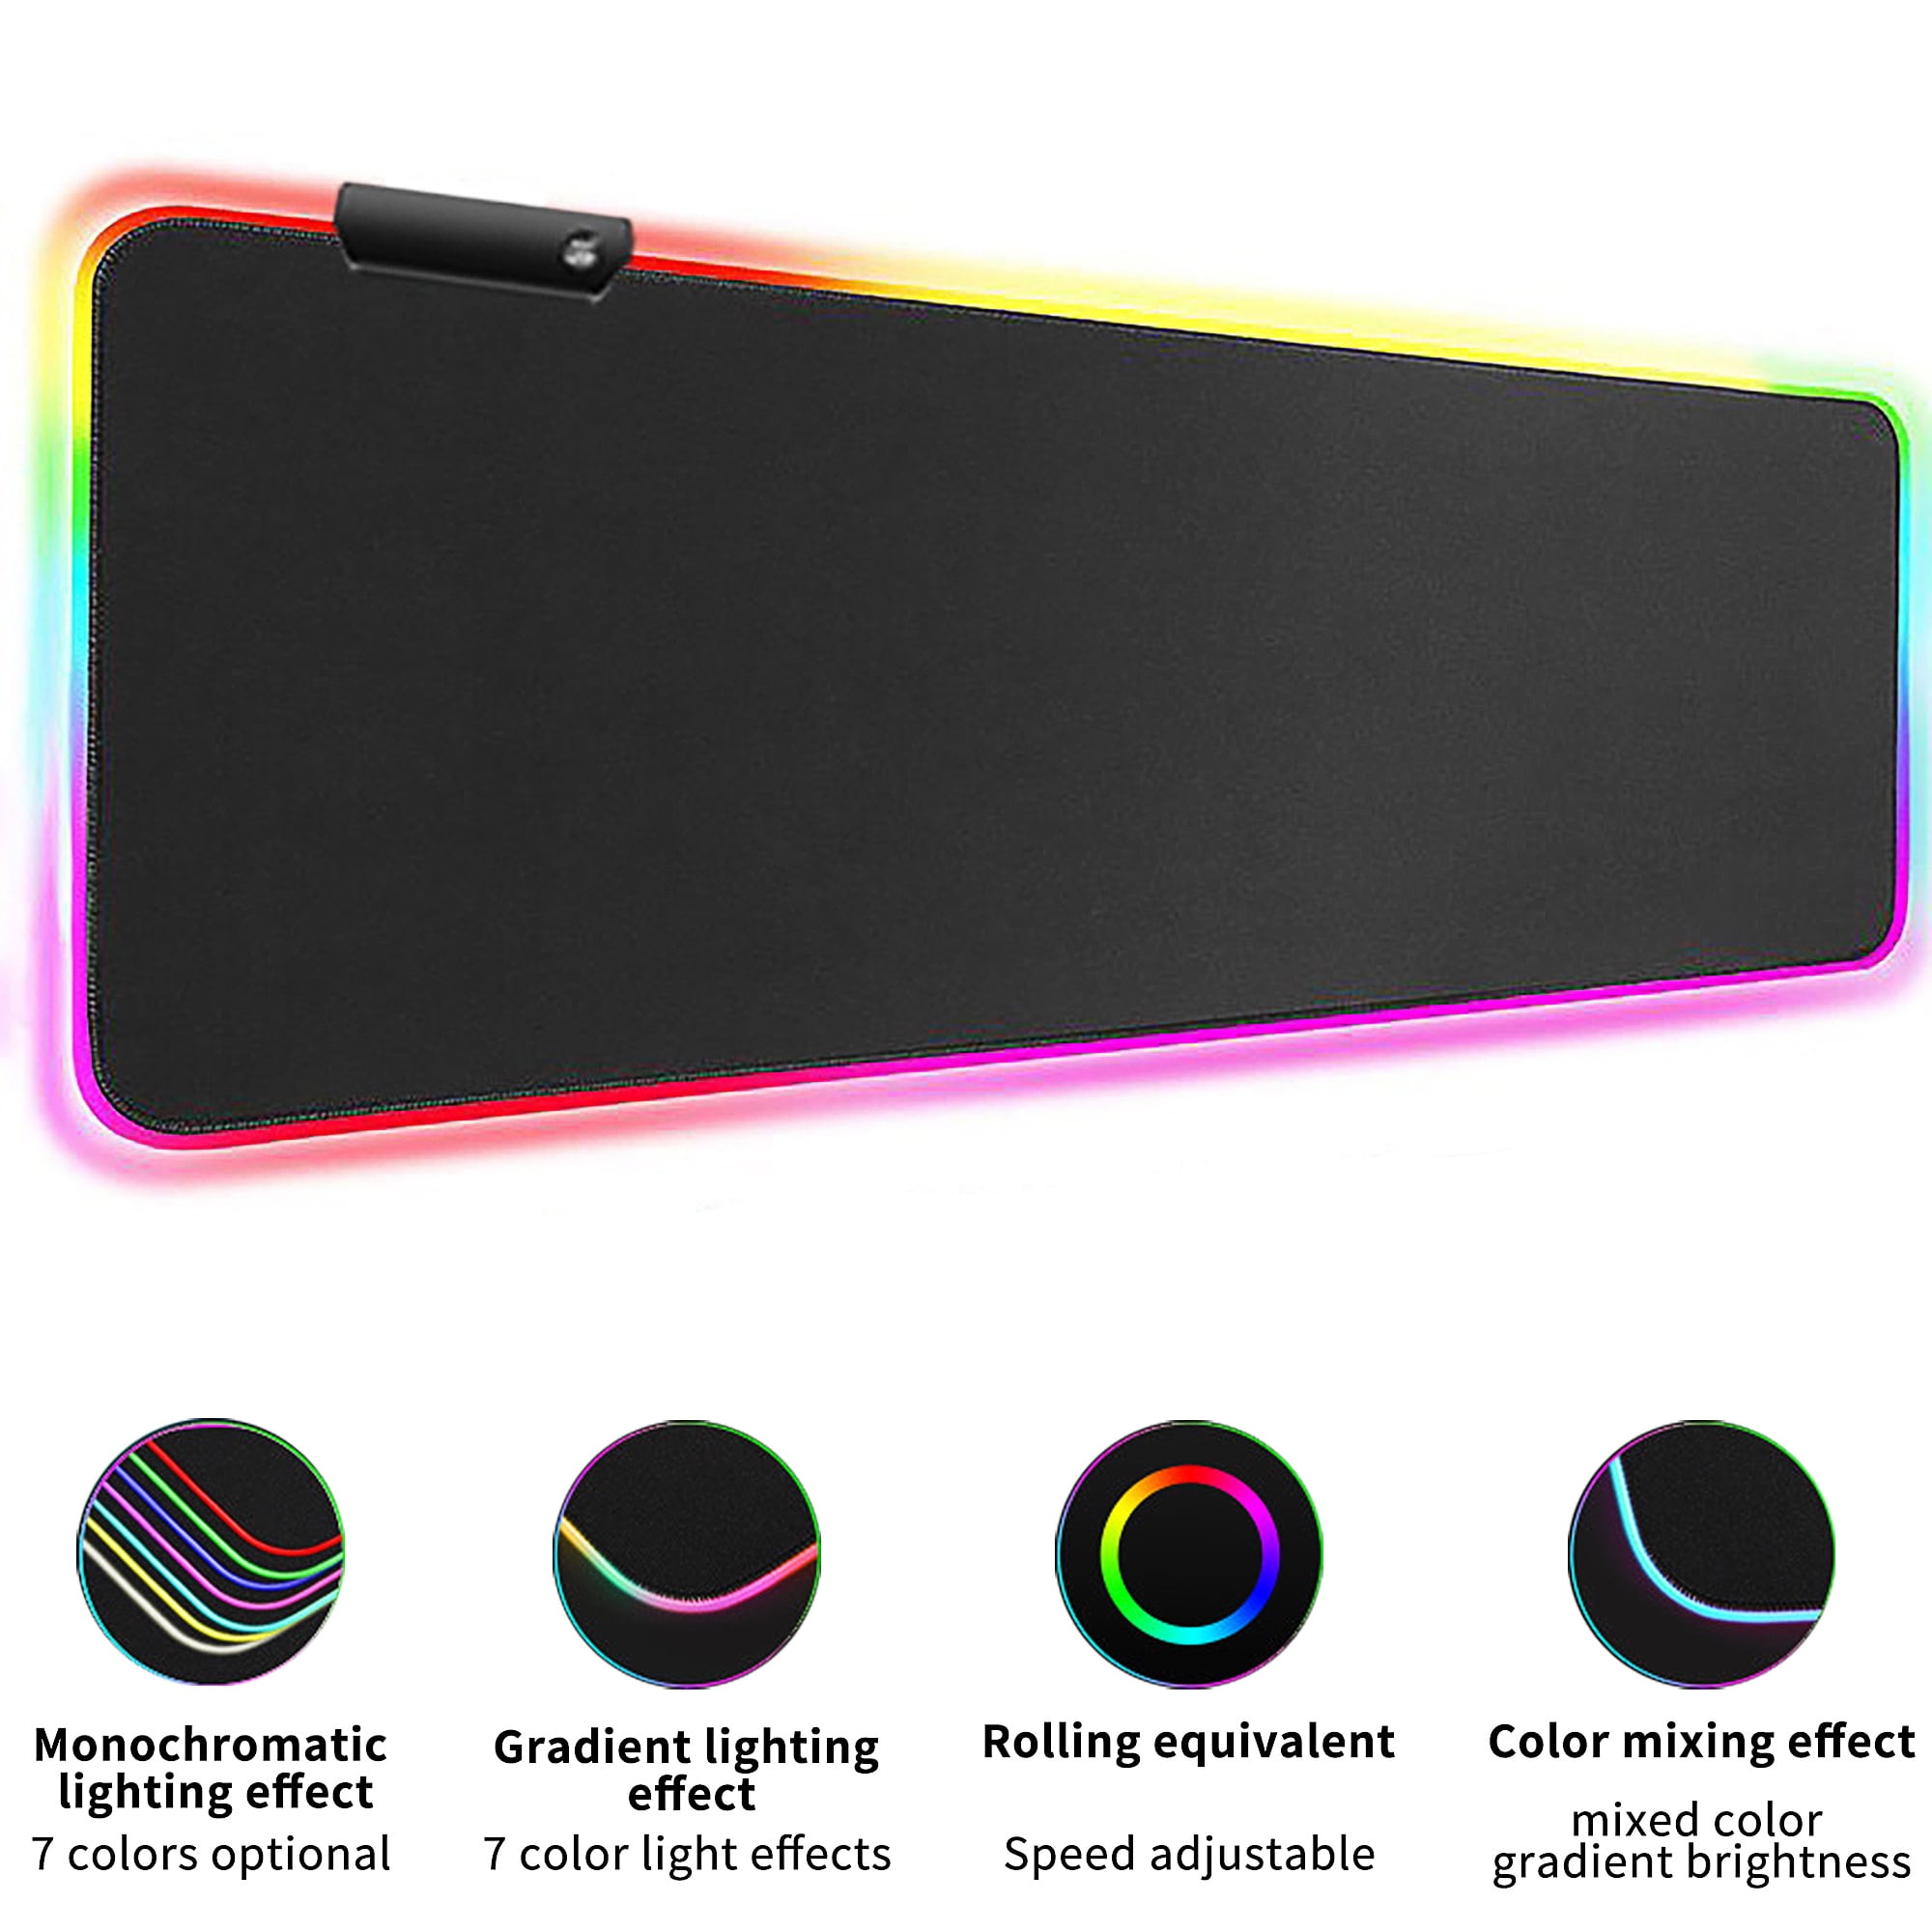 RGB Gaming Large Extended Soft LED Mouse Pad and Desk Pad with 14 Lighting Modes, Size: 31.5×11.8, Black